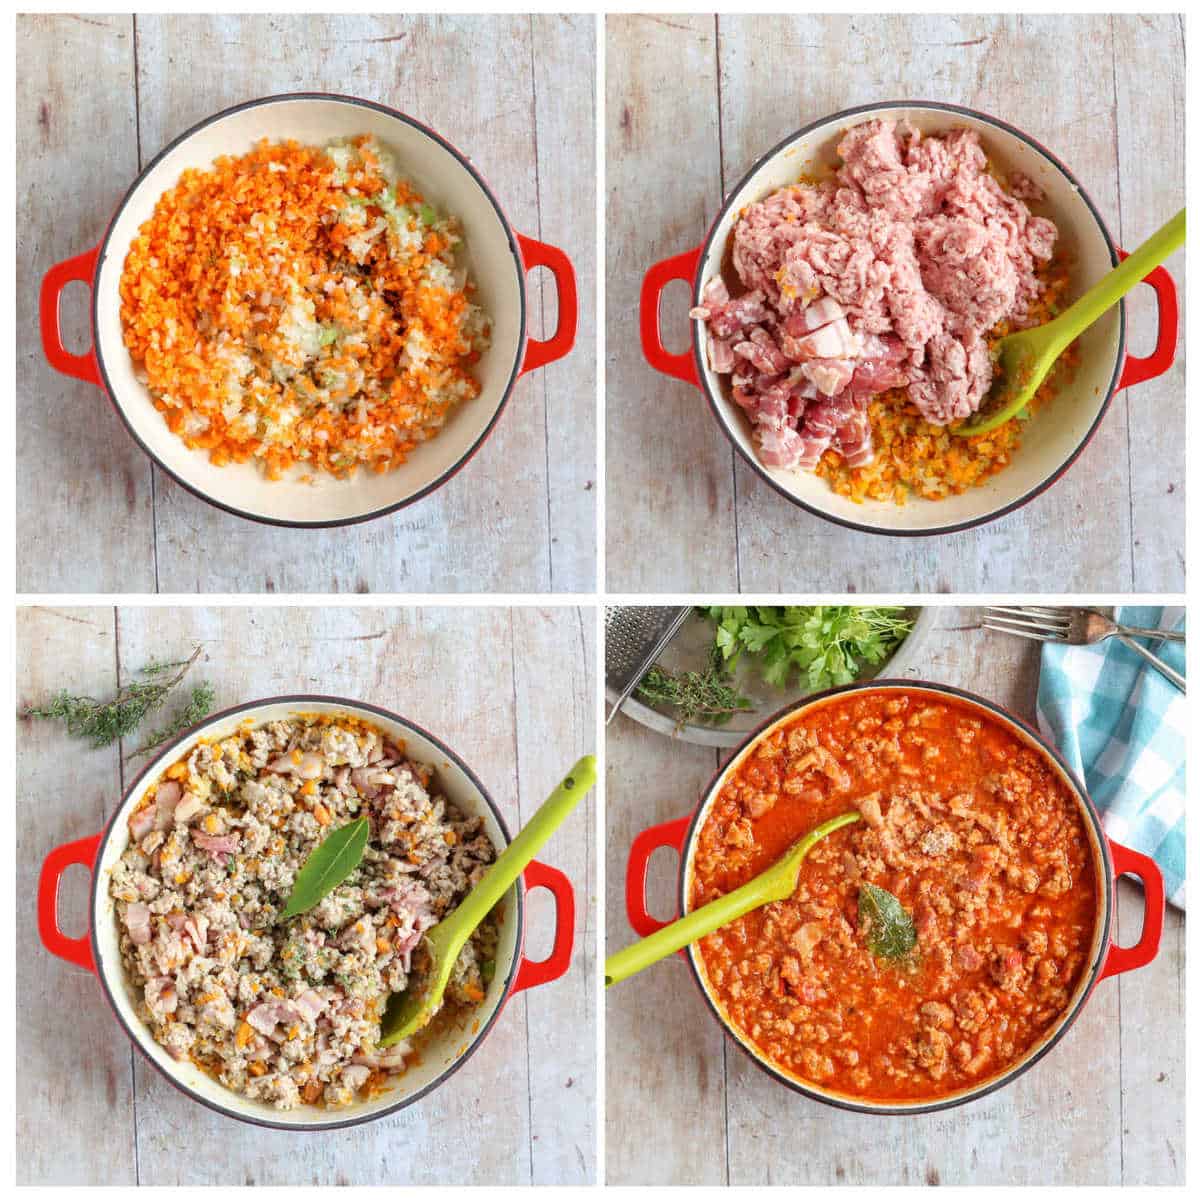 Step by step photo instructions collage for making pork bolognese.